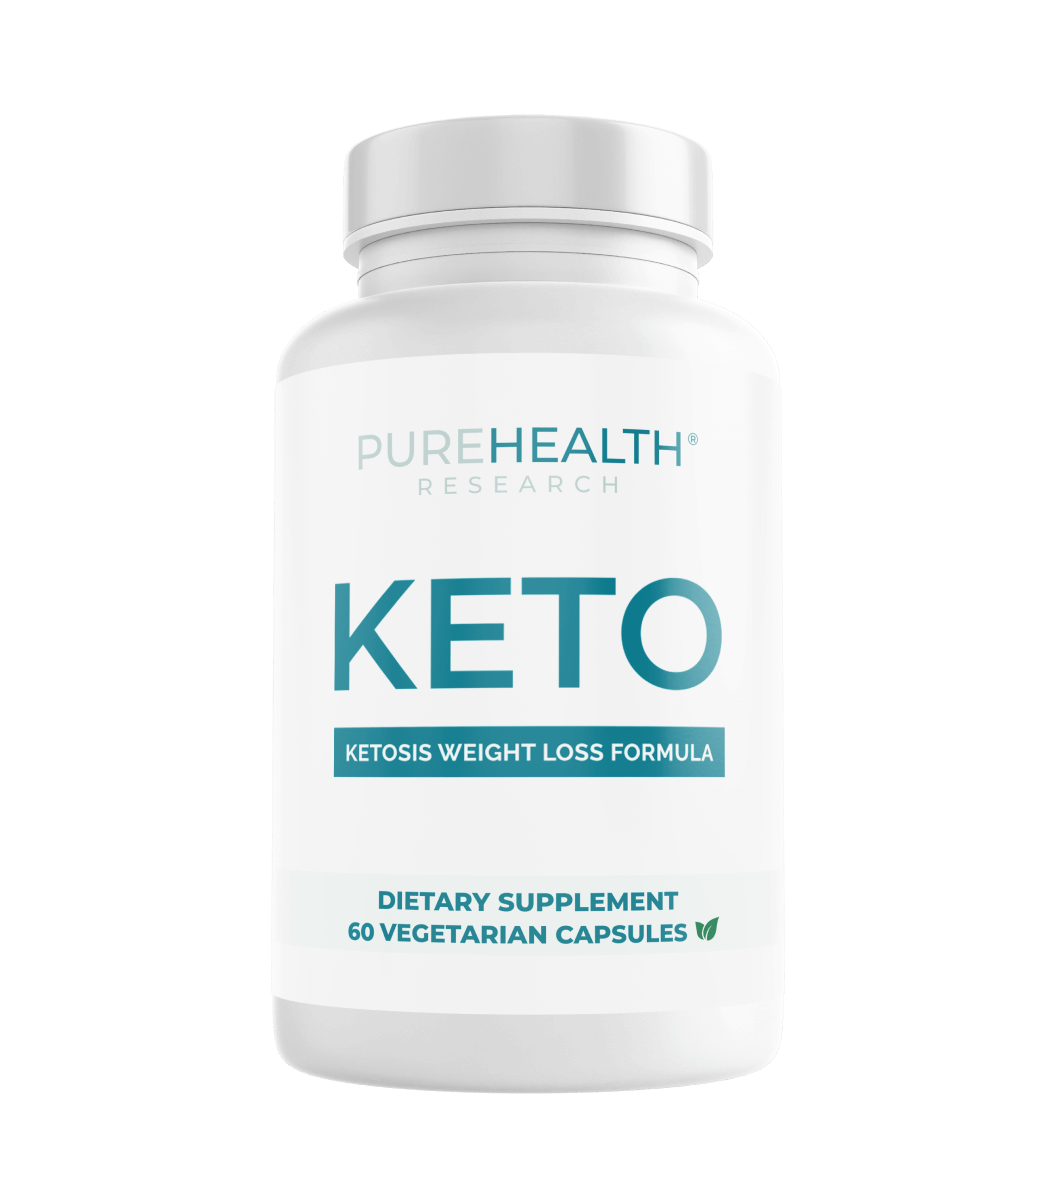 Keto supplement bottle by PureHealth Research